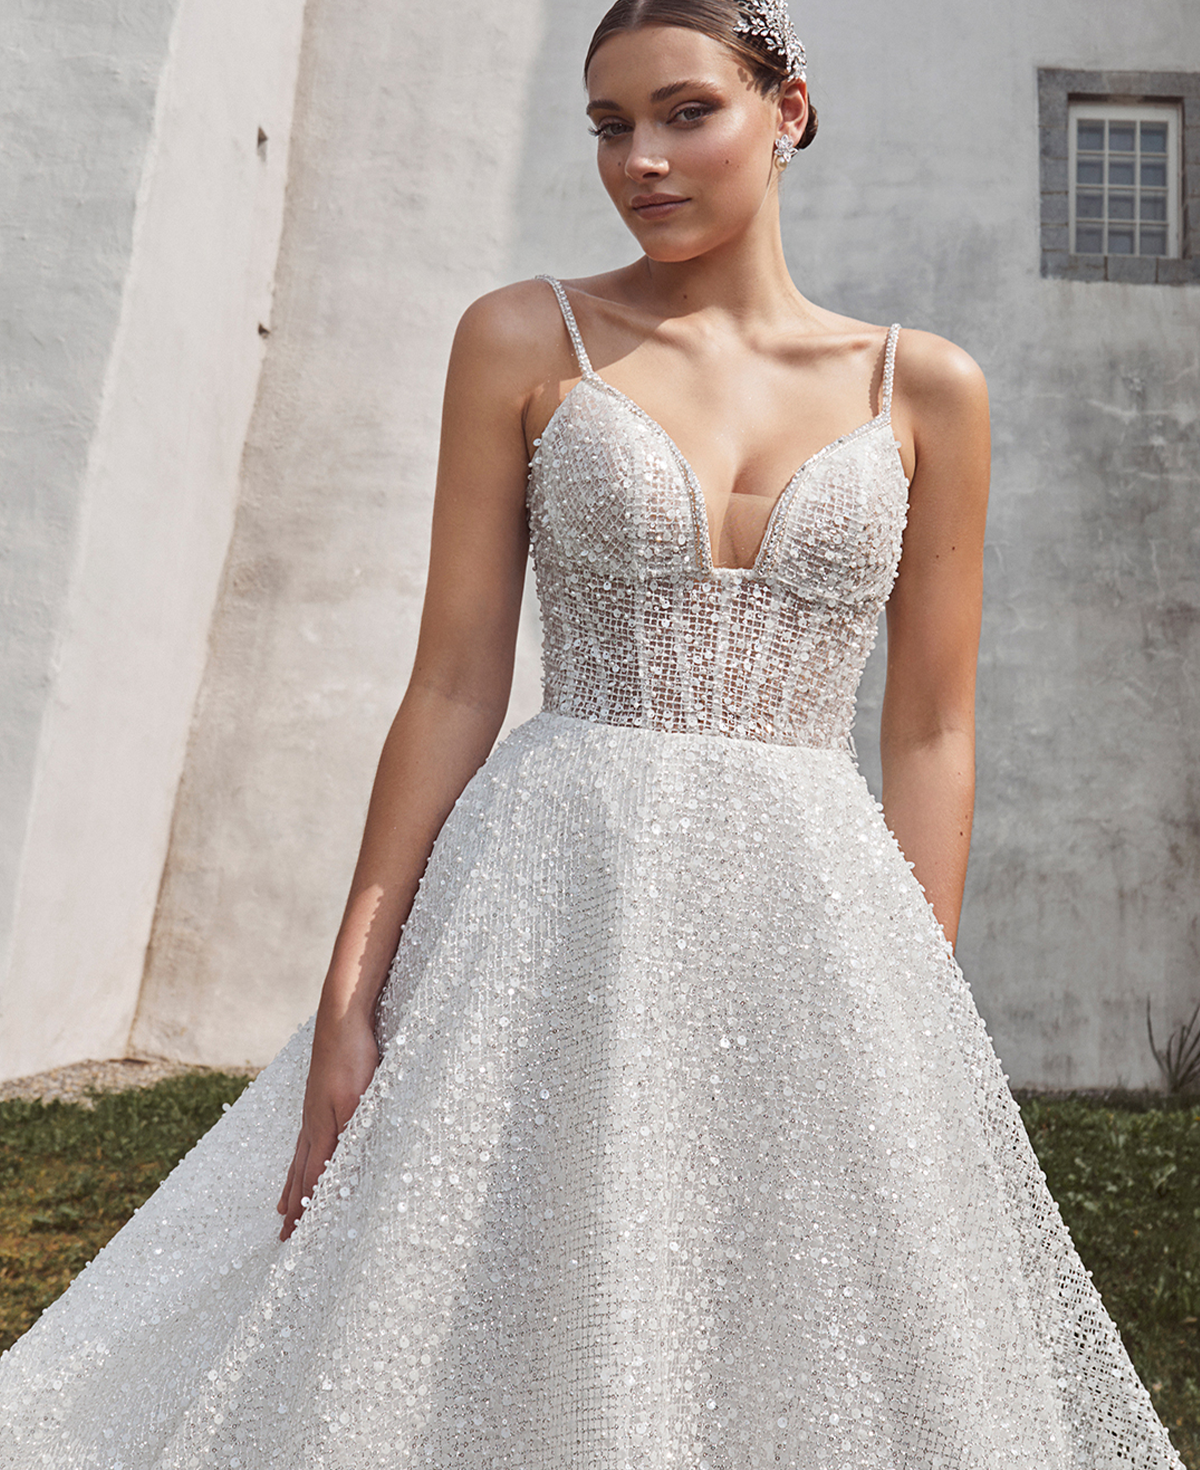 Super Sparkly Wedding Dress with Pockets and Spaghetti Straps